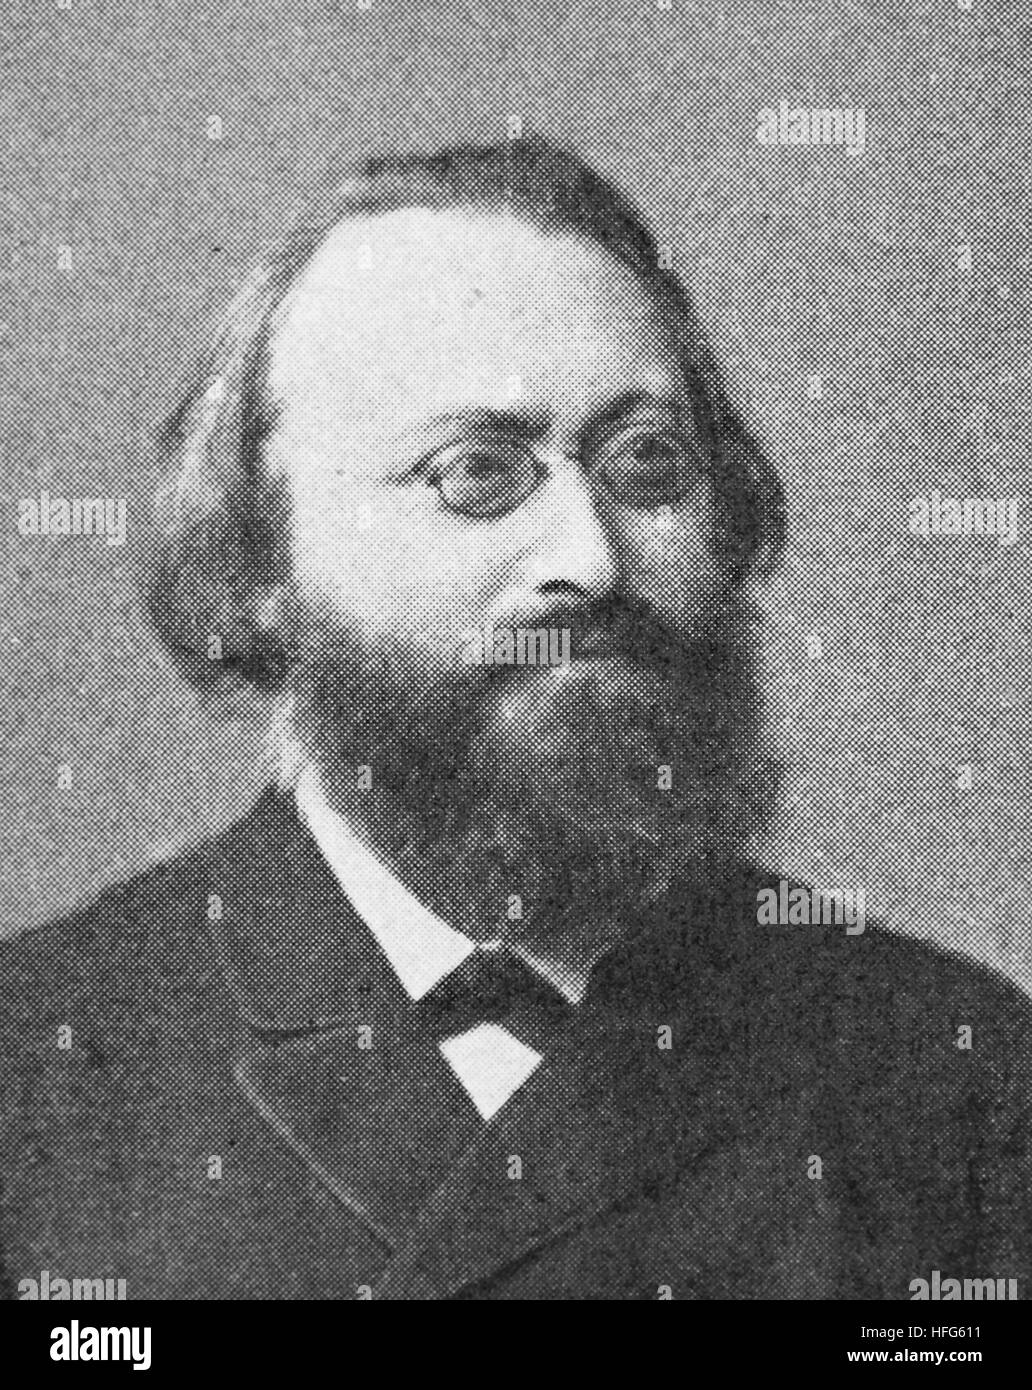 Max Christian Friedrich Bruch, 1838 - 1920, also known as Max Karl August Bruch, was a German Romantic composer and conductor who wrote over 200 works, including three violin concertos, reproduction photo from the year 1895, digital improved Stock Photo